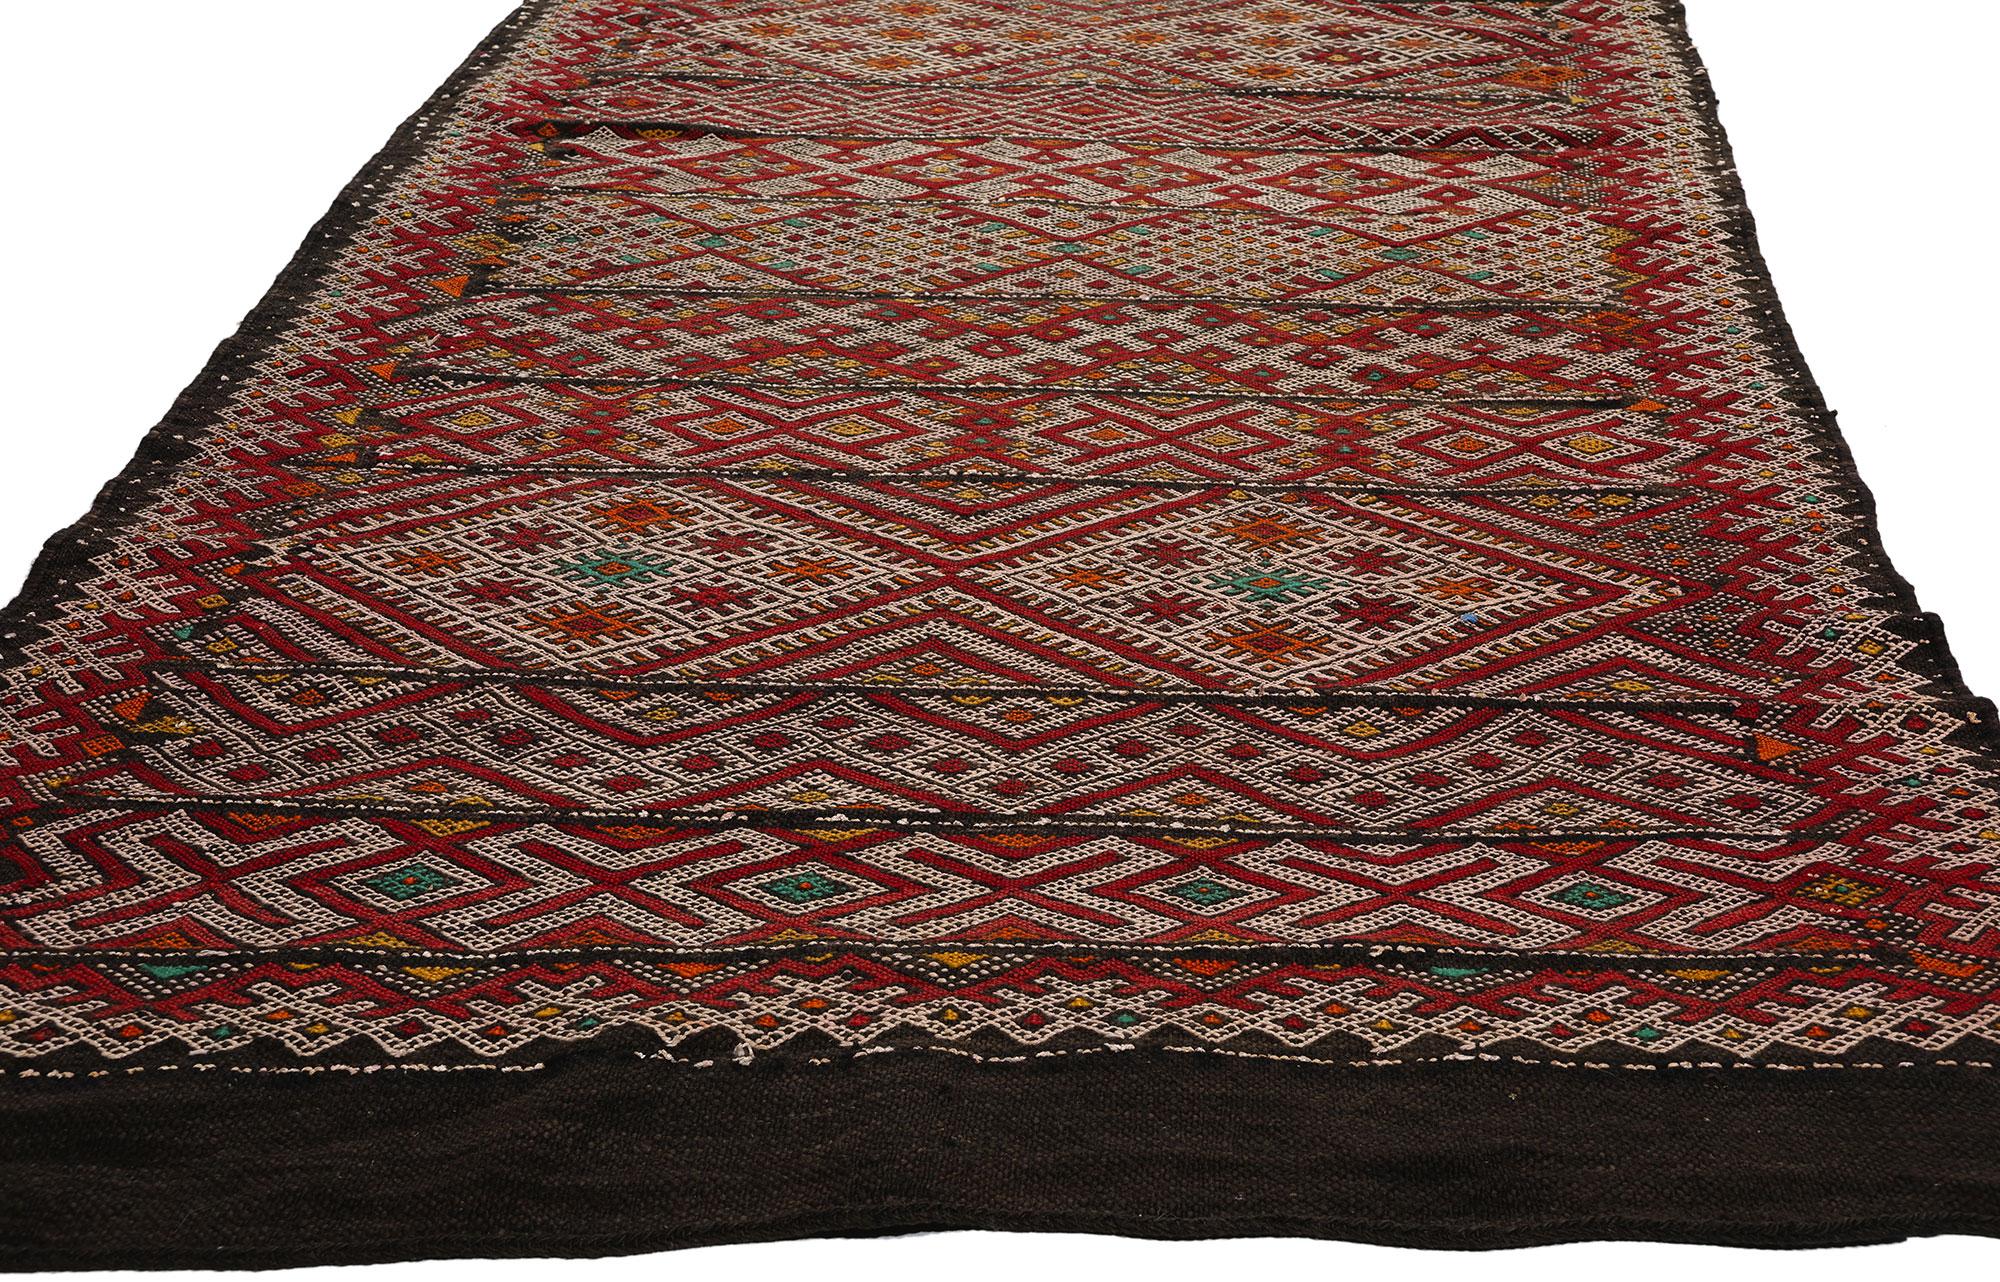 Hand-Woven Vintage Zemmour Moroccan Flatweave Carpet, 03'07 x 20'04 For Sale